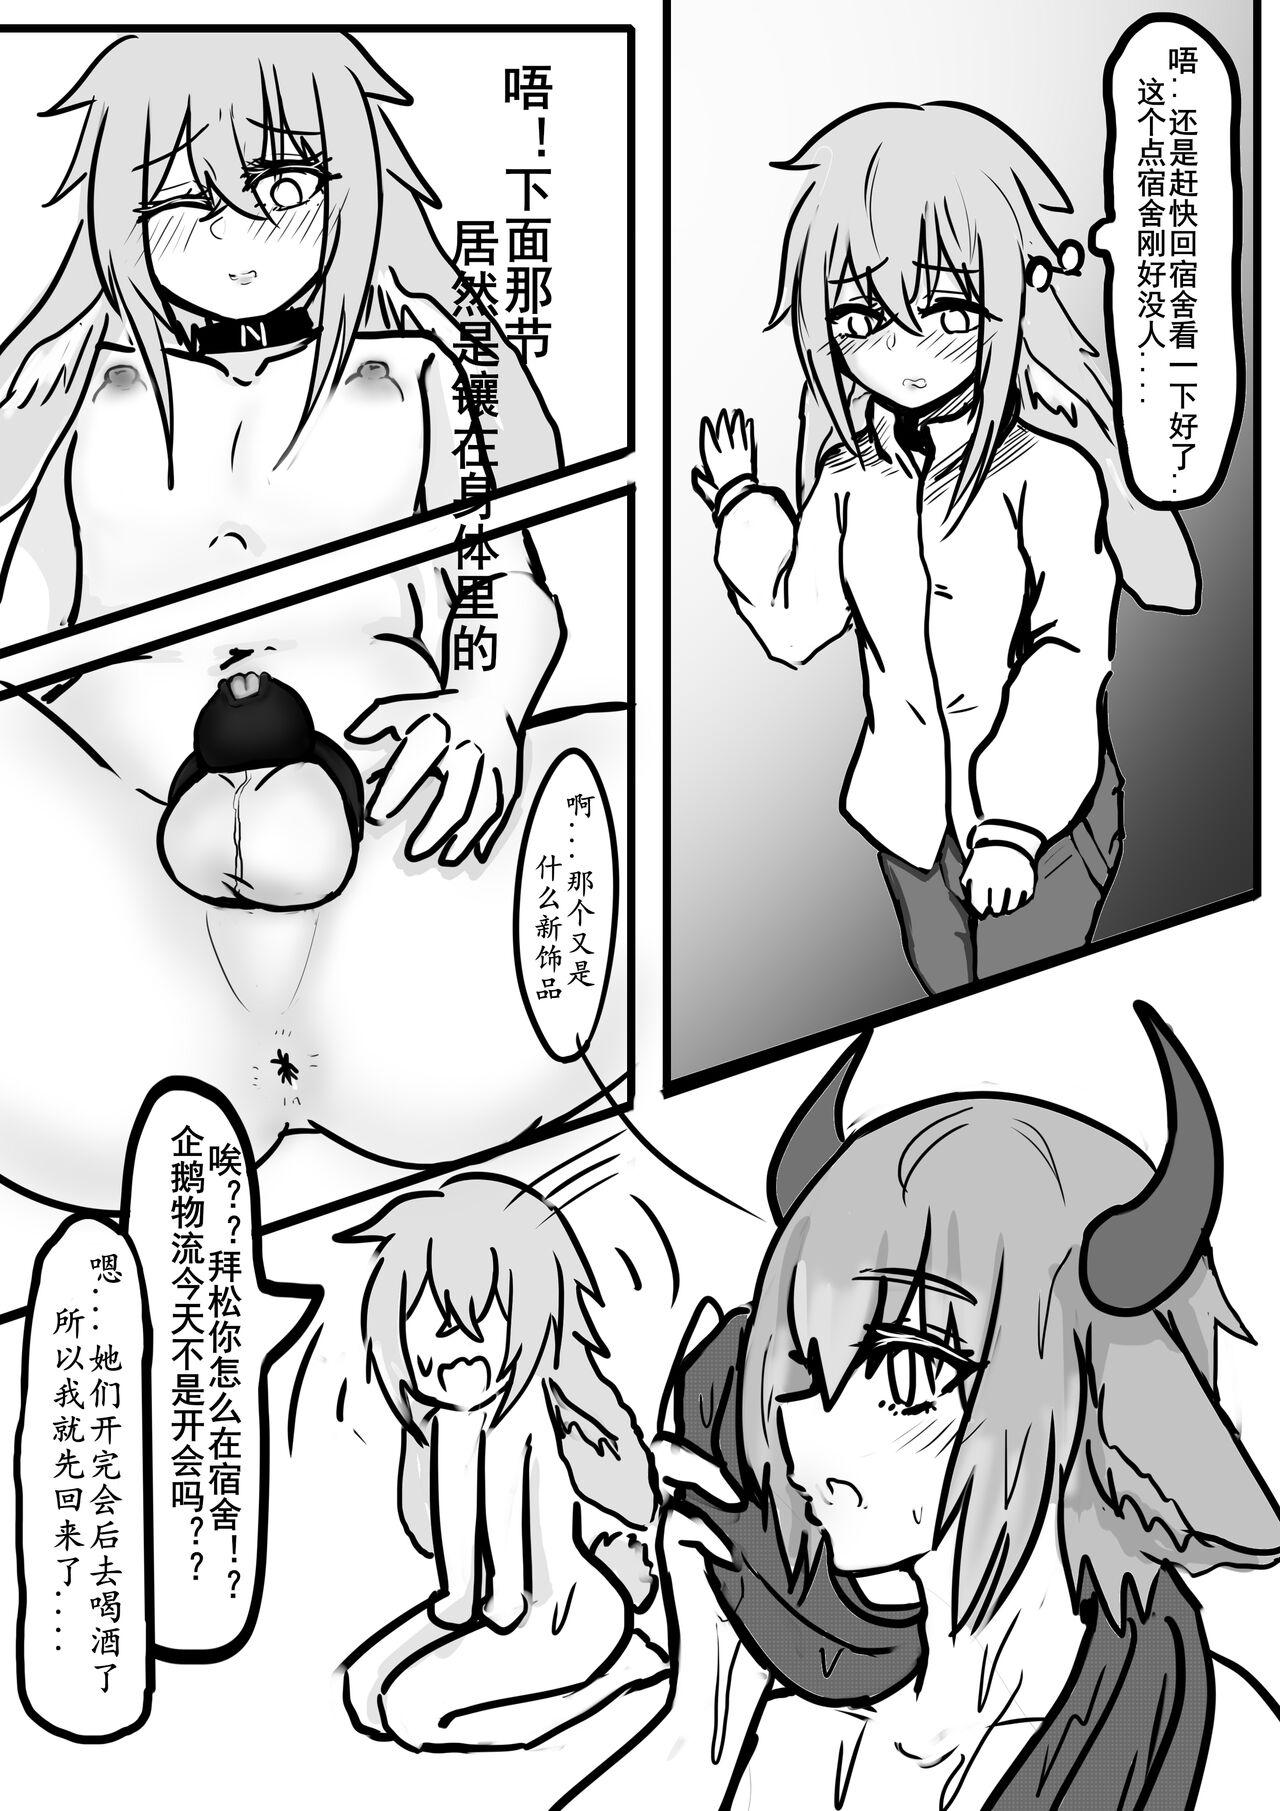 Jap Special services of Ansel Ⅲ - Arknights Chastity - Page 7